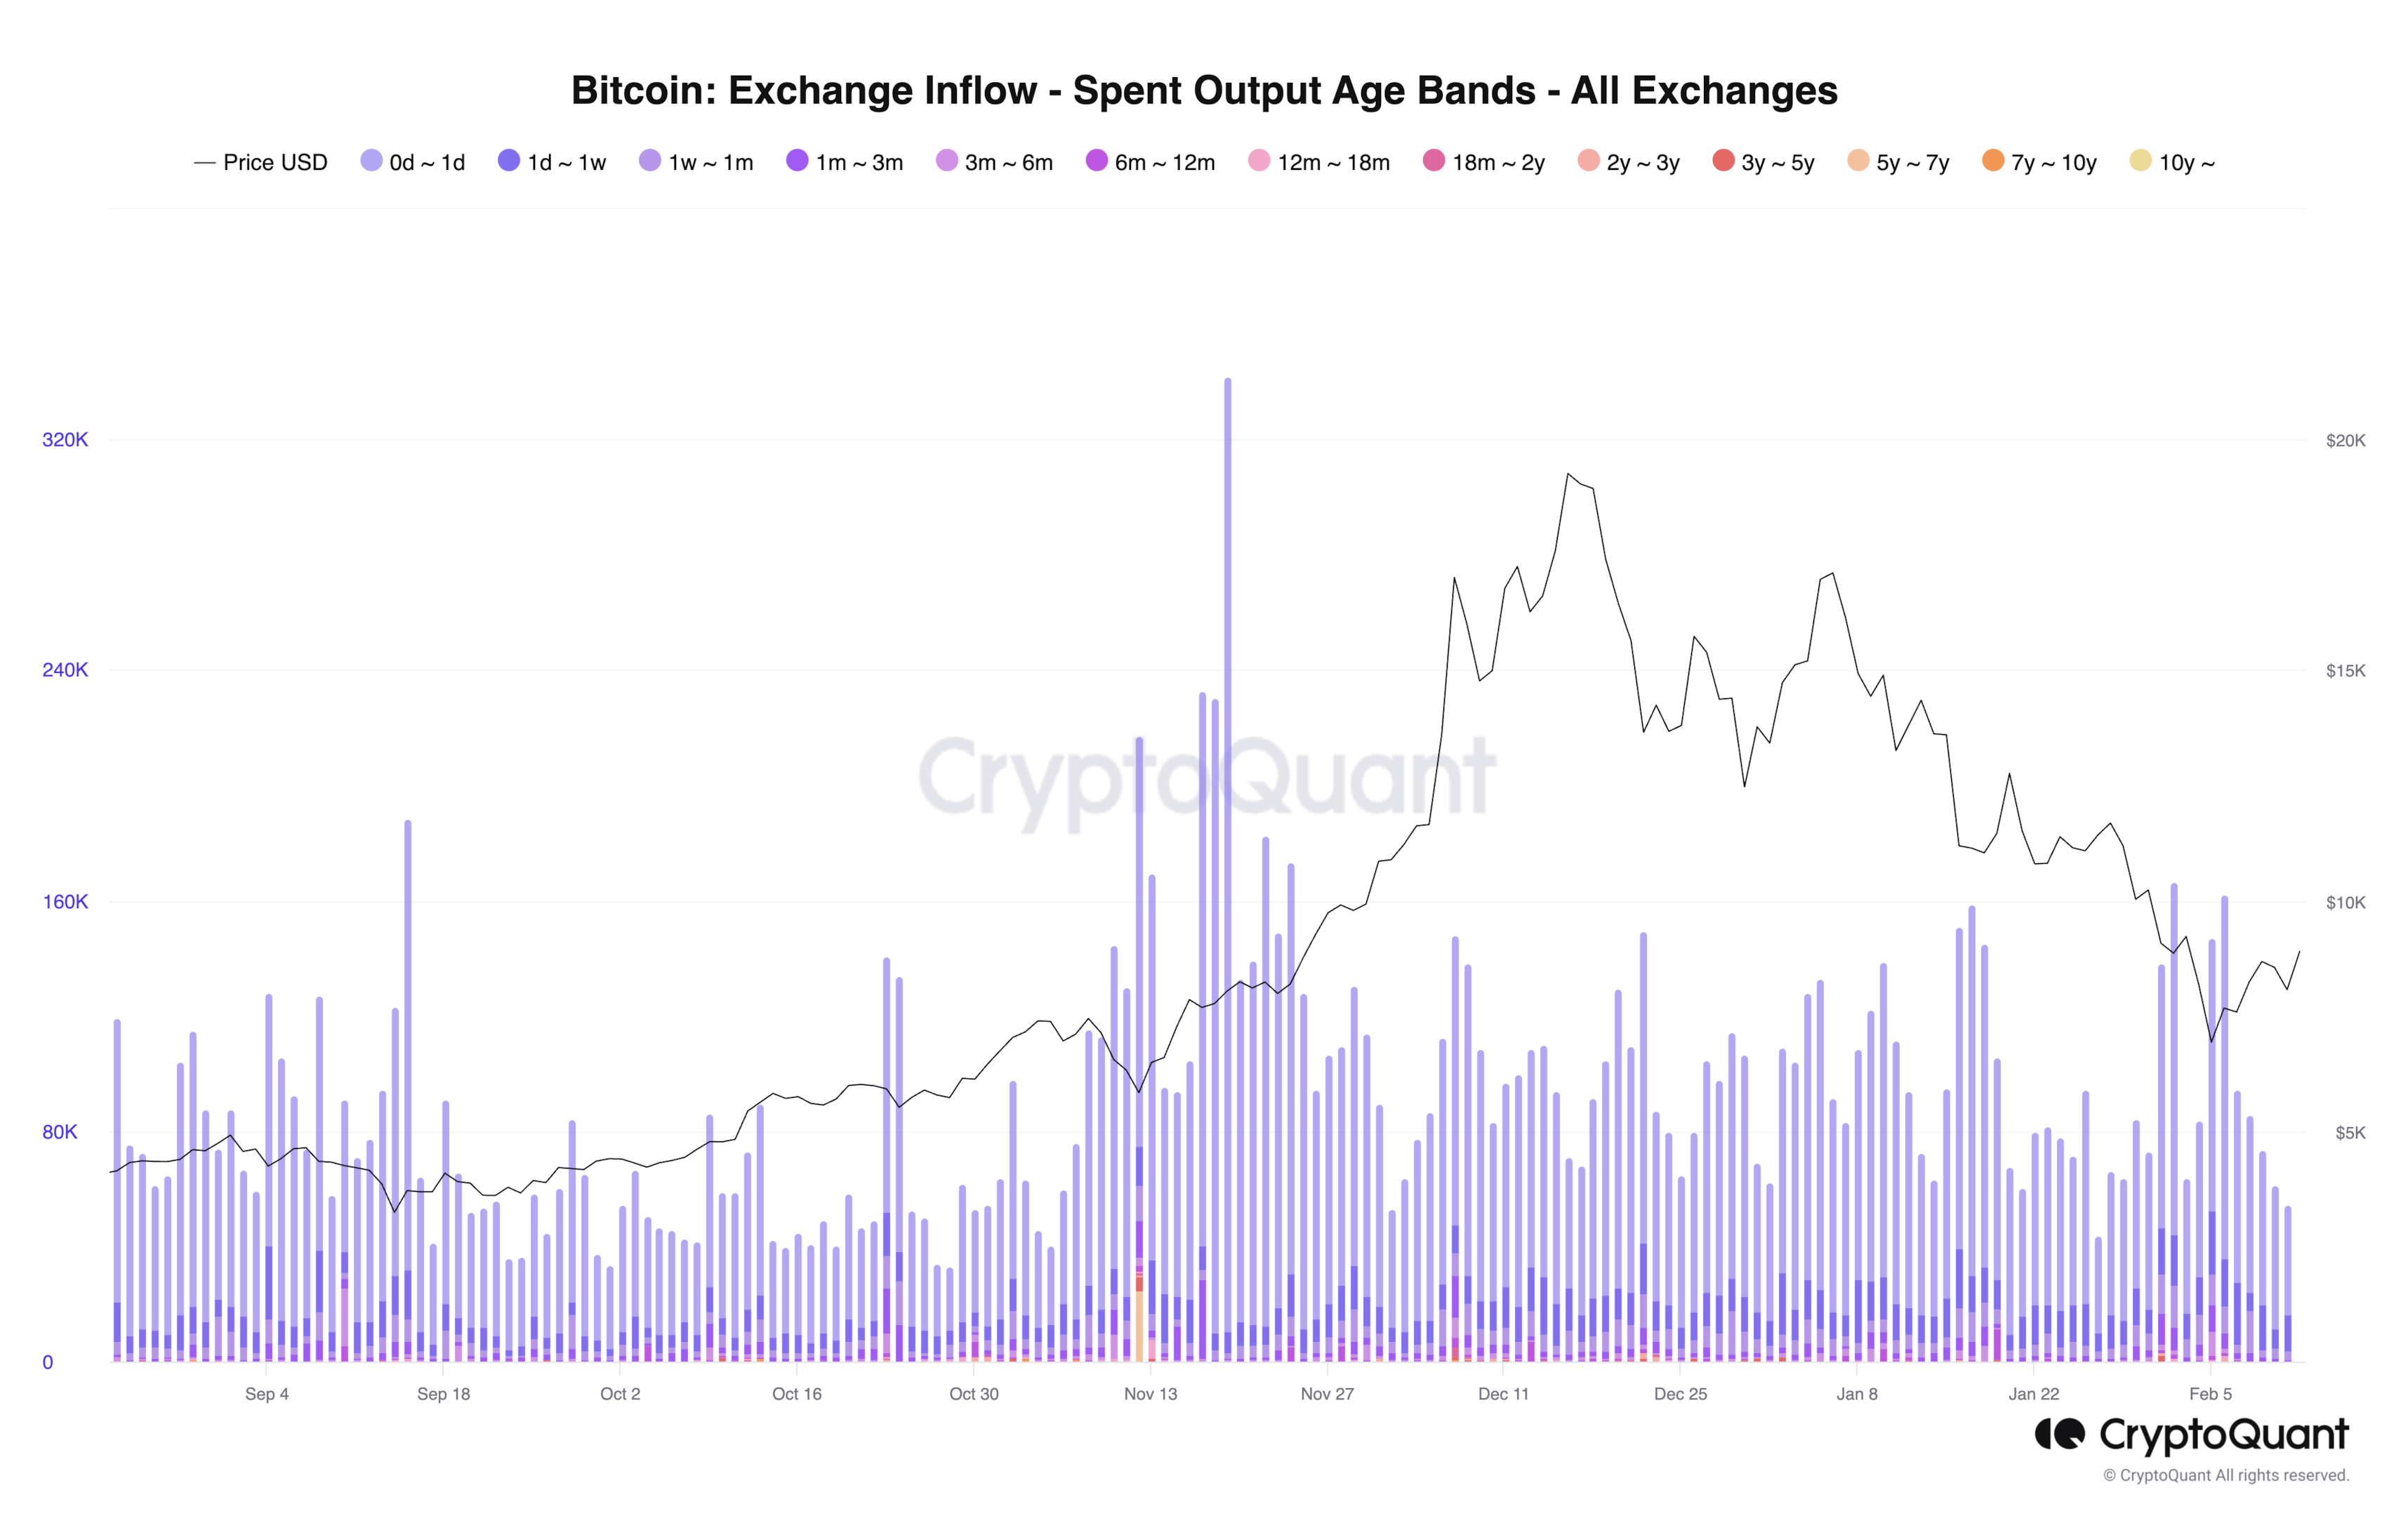 Bitcoin: Exchange Inflow - Spent Output Age Bands - All Exchanges. CryptoQuant